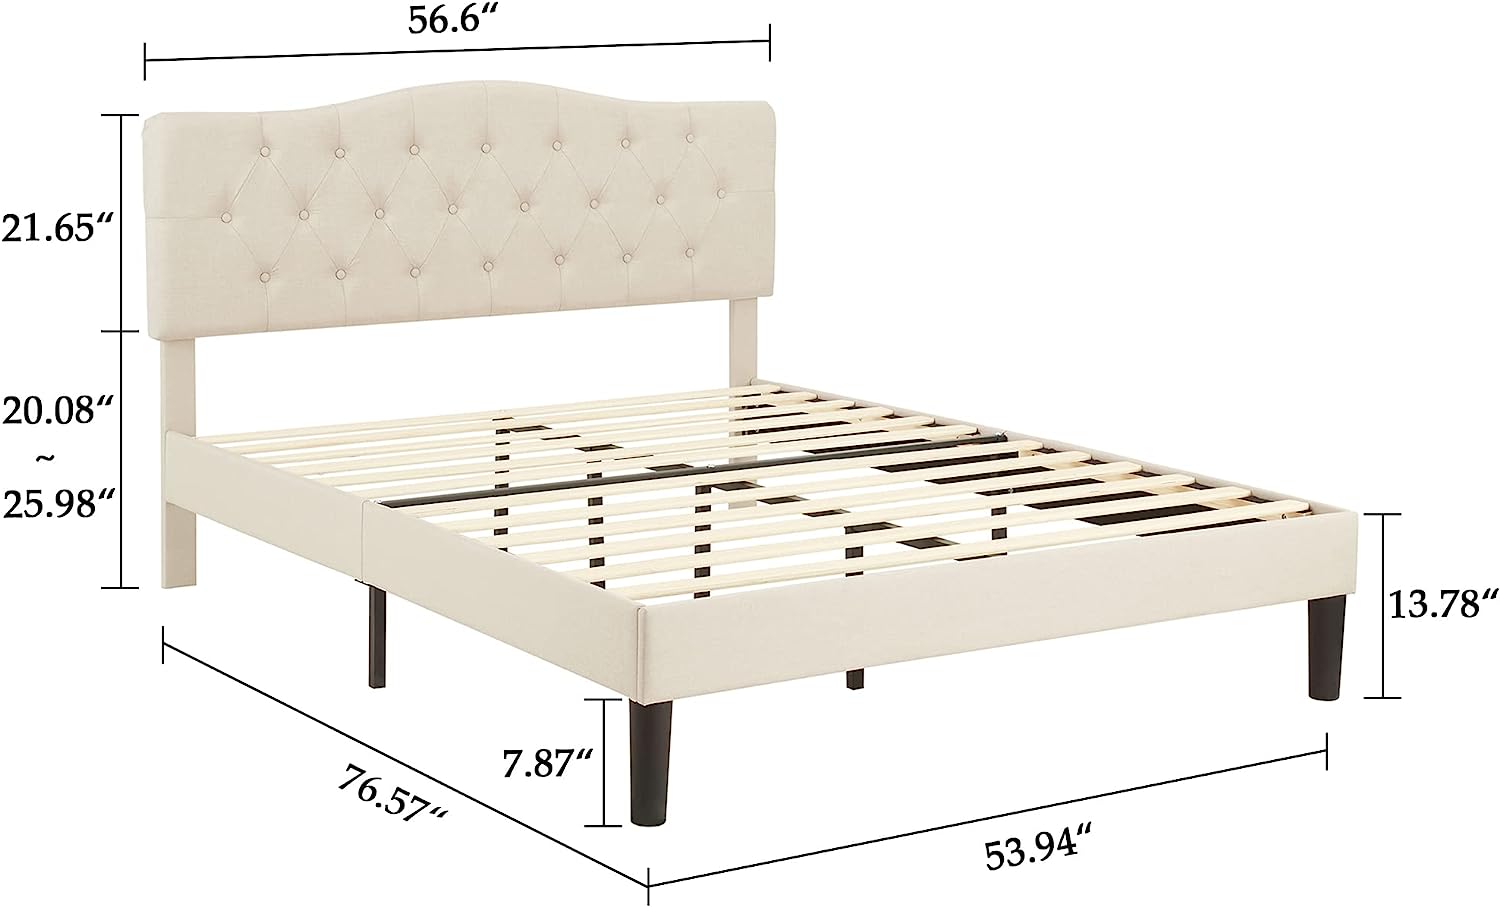 VECELO Classic Upholstered Platform Bed Frame with Diamond Stitched Cloth